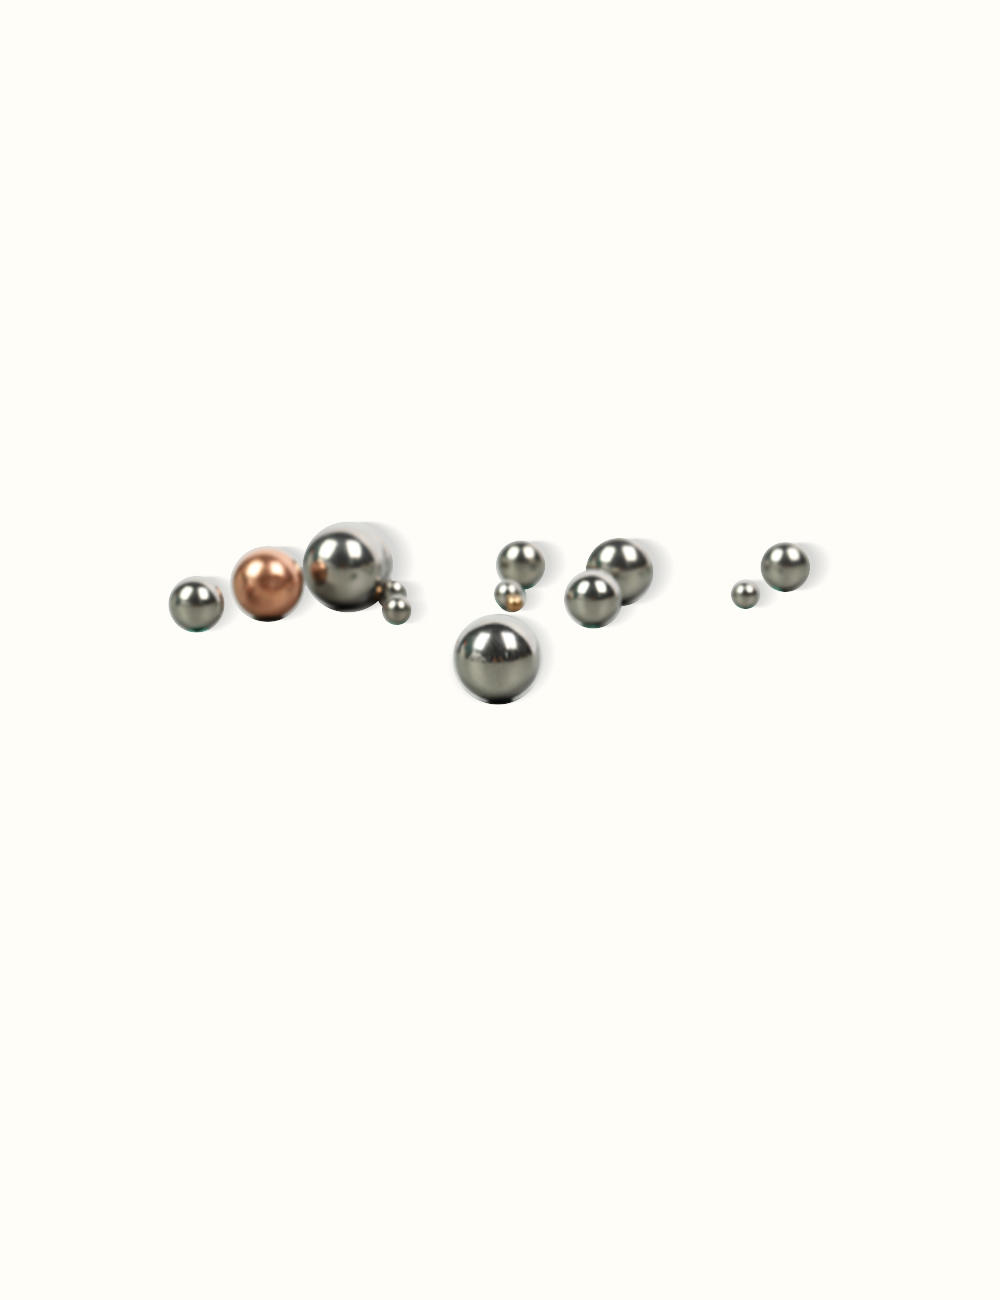  Steel ball for other application